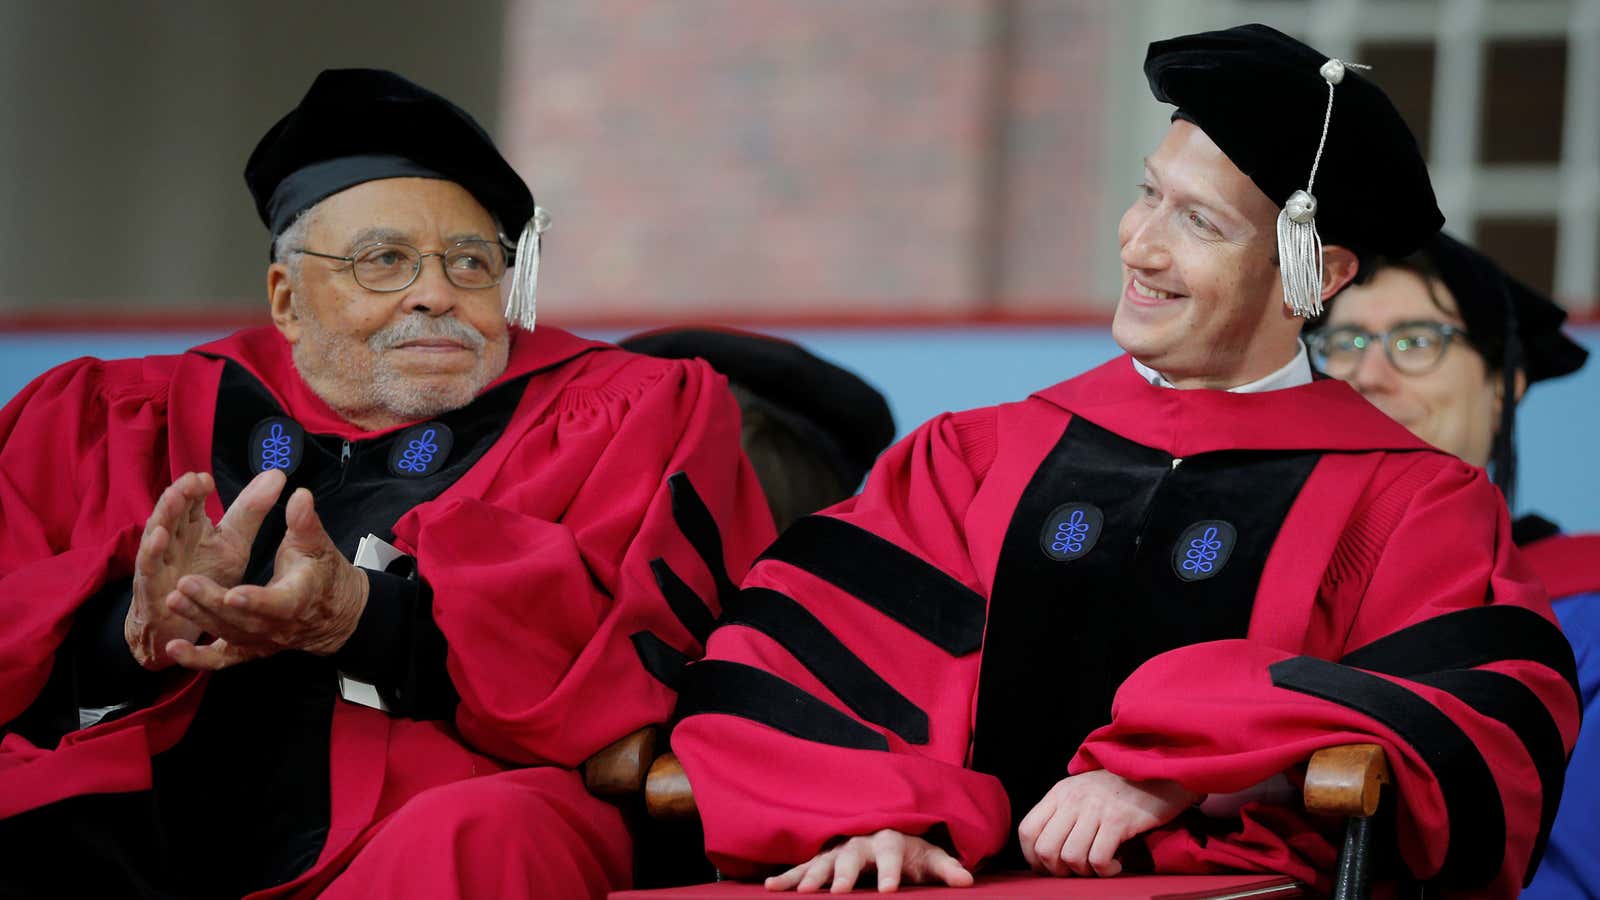 Zuck and the voice of Darth Vader are honorary doctors, but you get the idea.